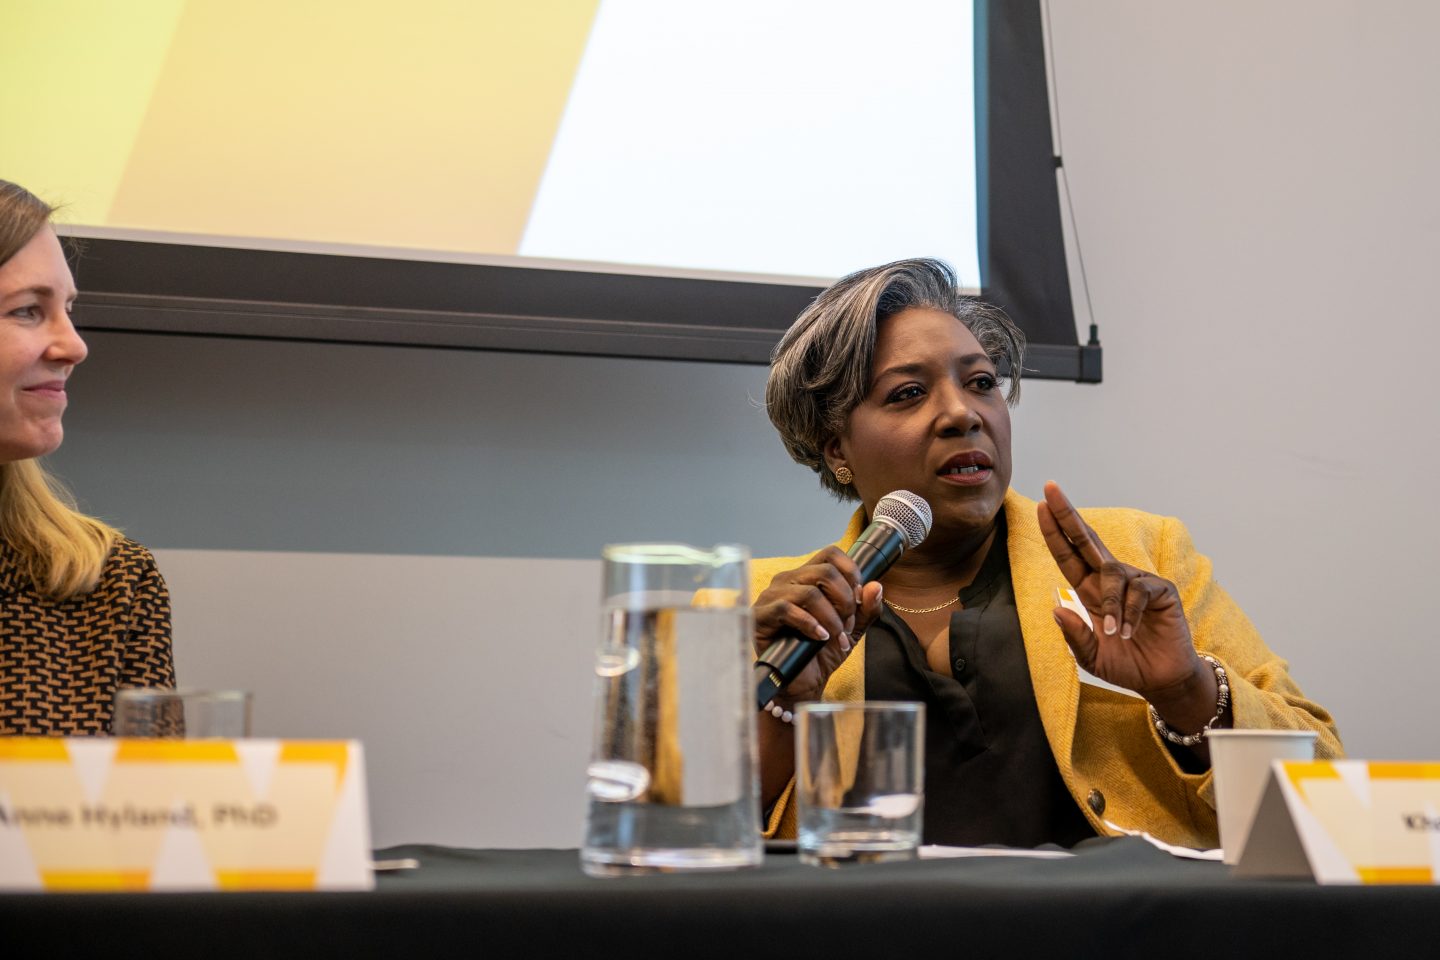 A Black woman with short grayish hair wearing a gold blazer is seated behind a table, holding a microphone and speaking while she gestures with her left hand.